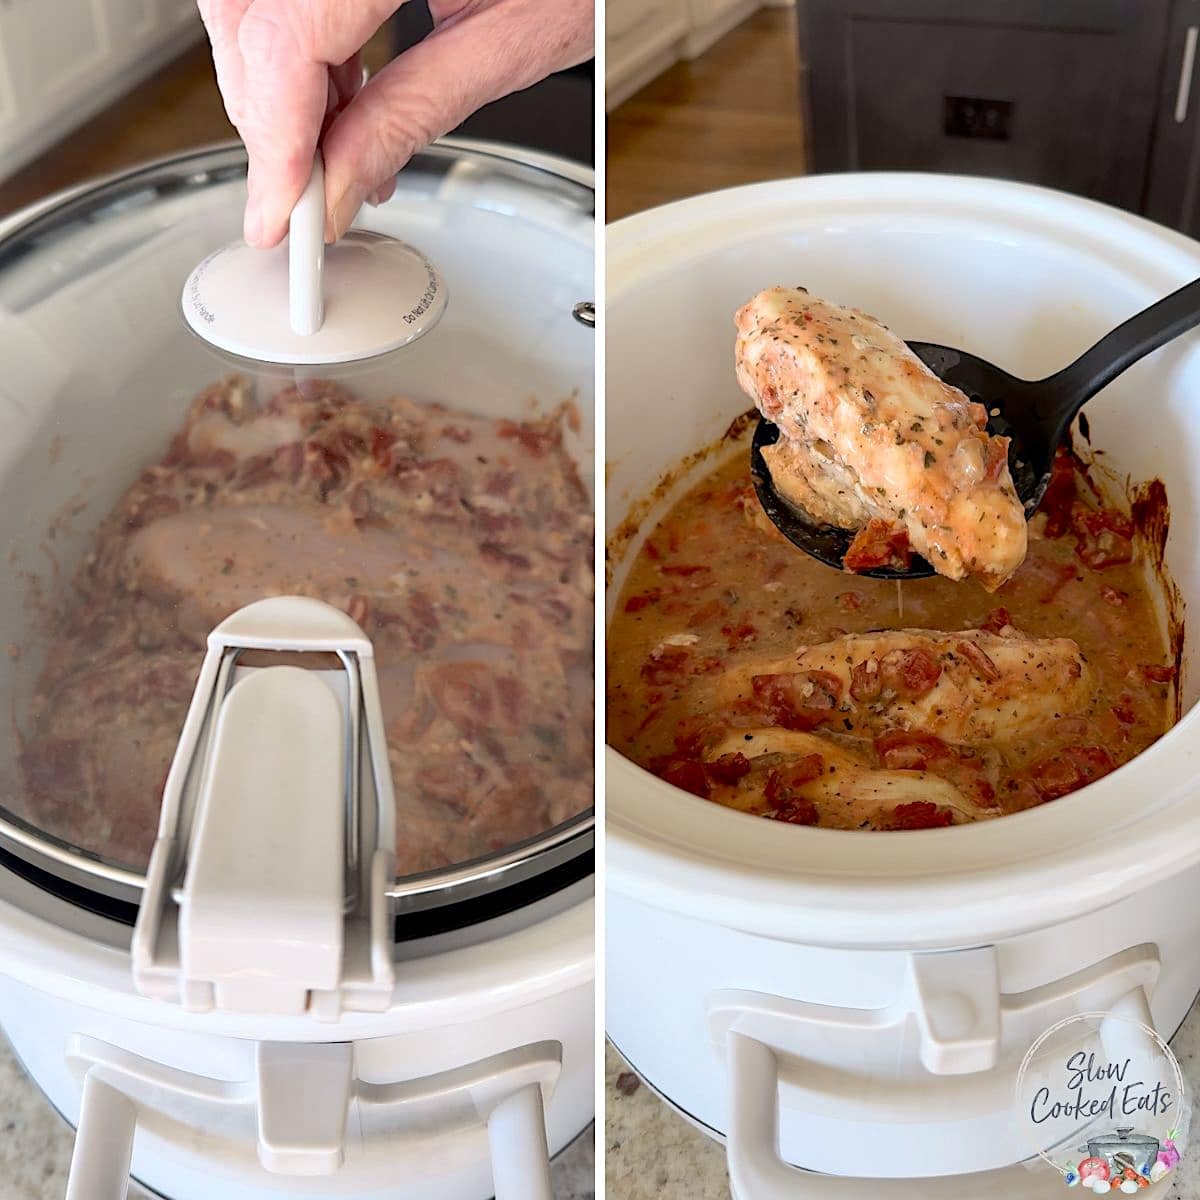 Placing the lid over the crock pot marry me chicken to slow cook the chicken breast.